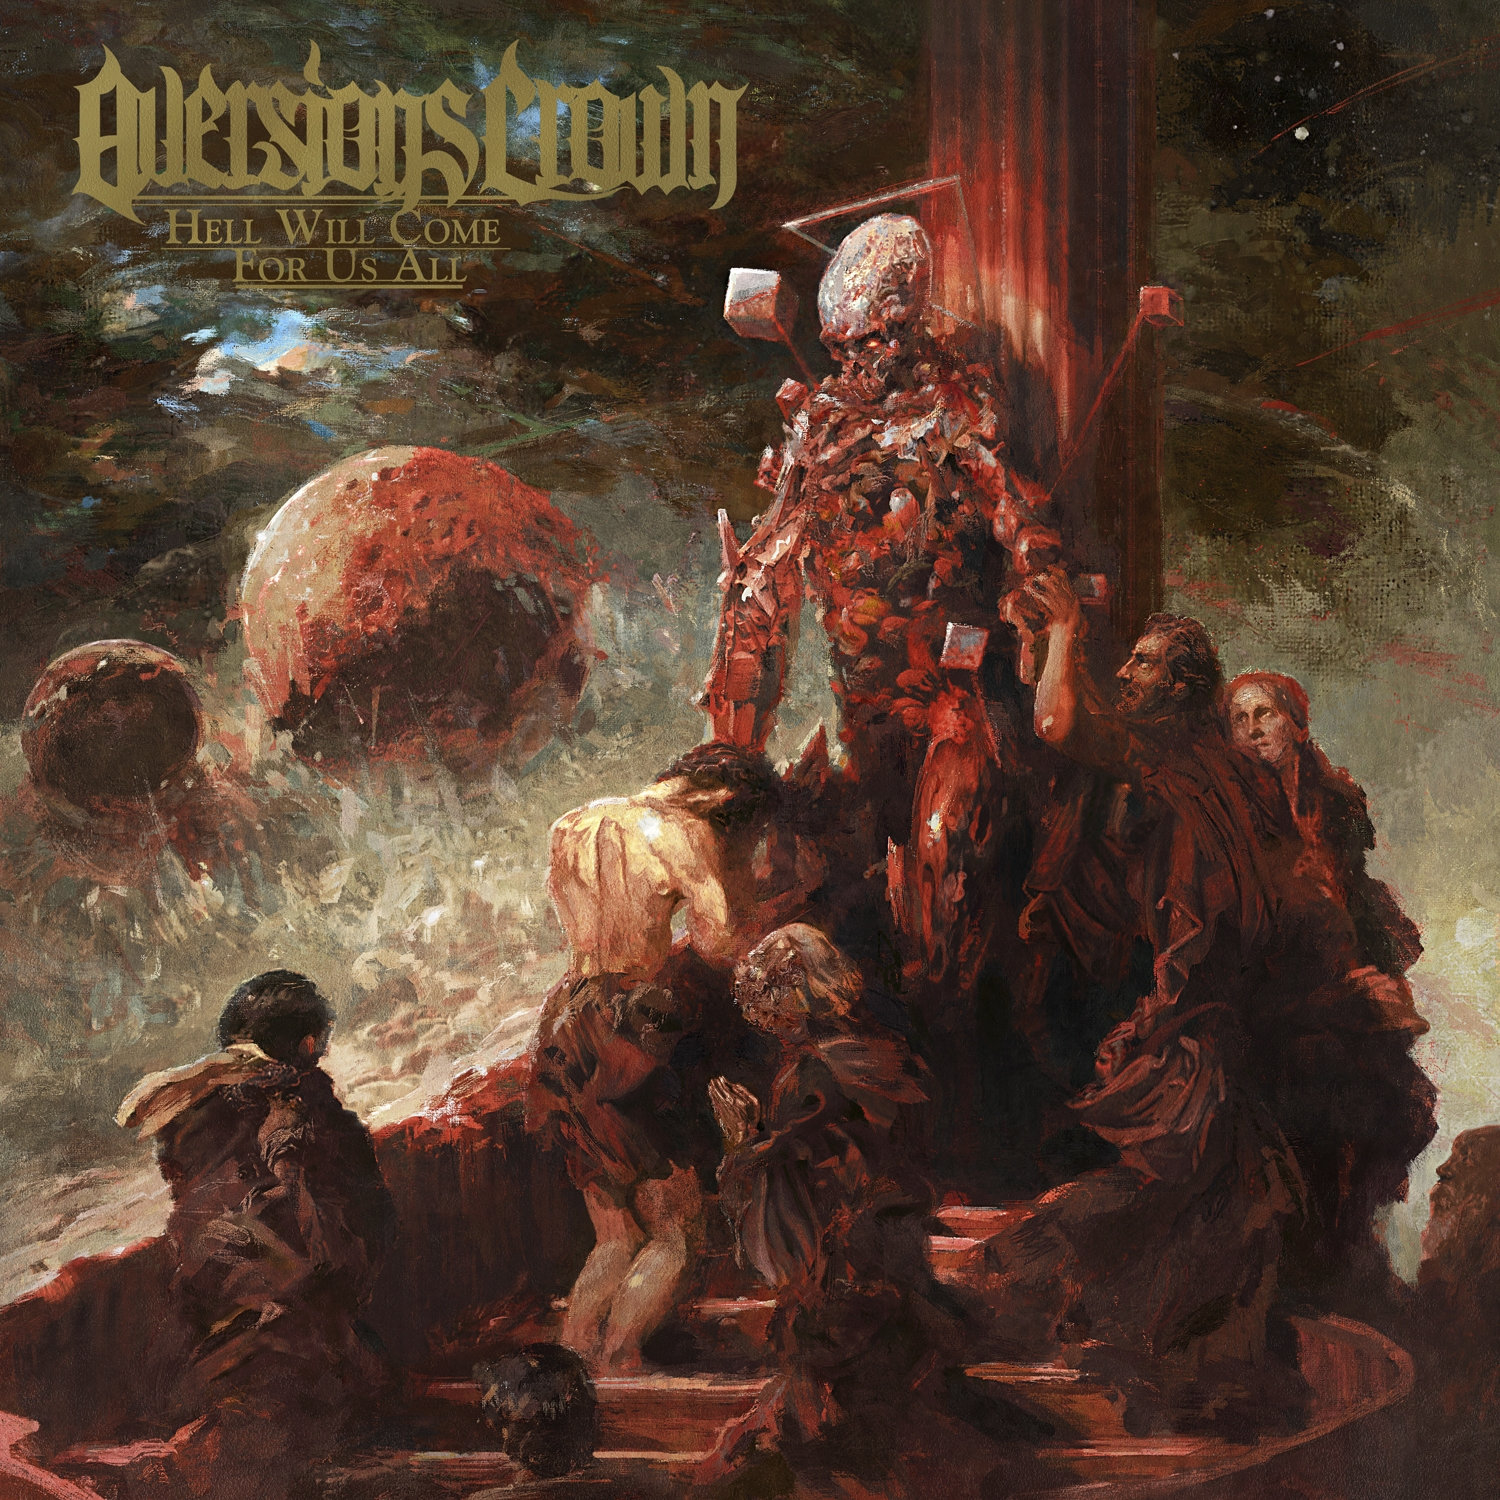 Aversions Crown : Hell Will Come For Us All